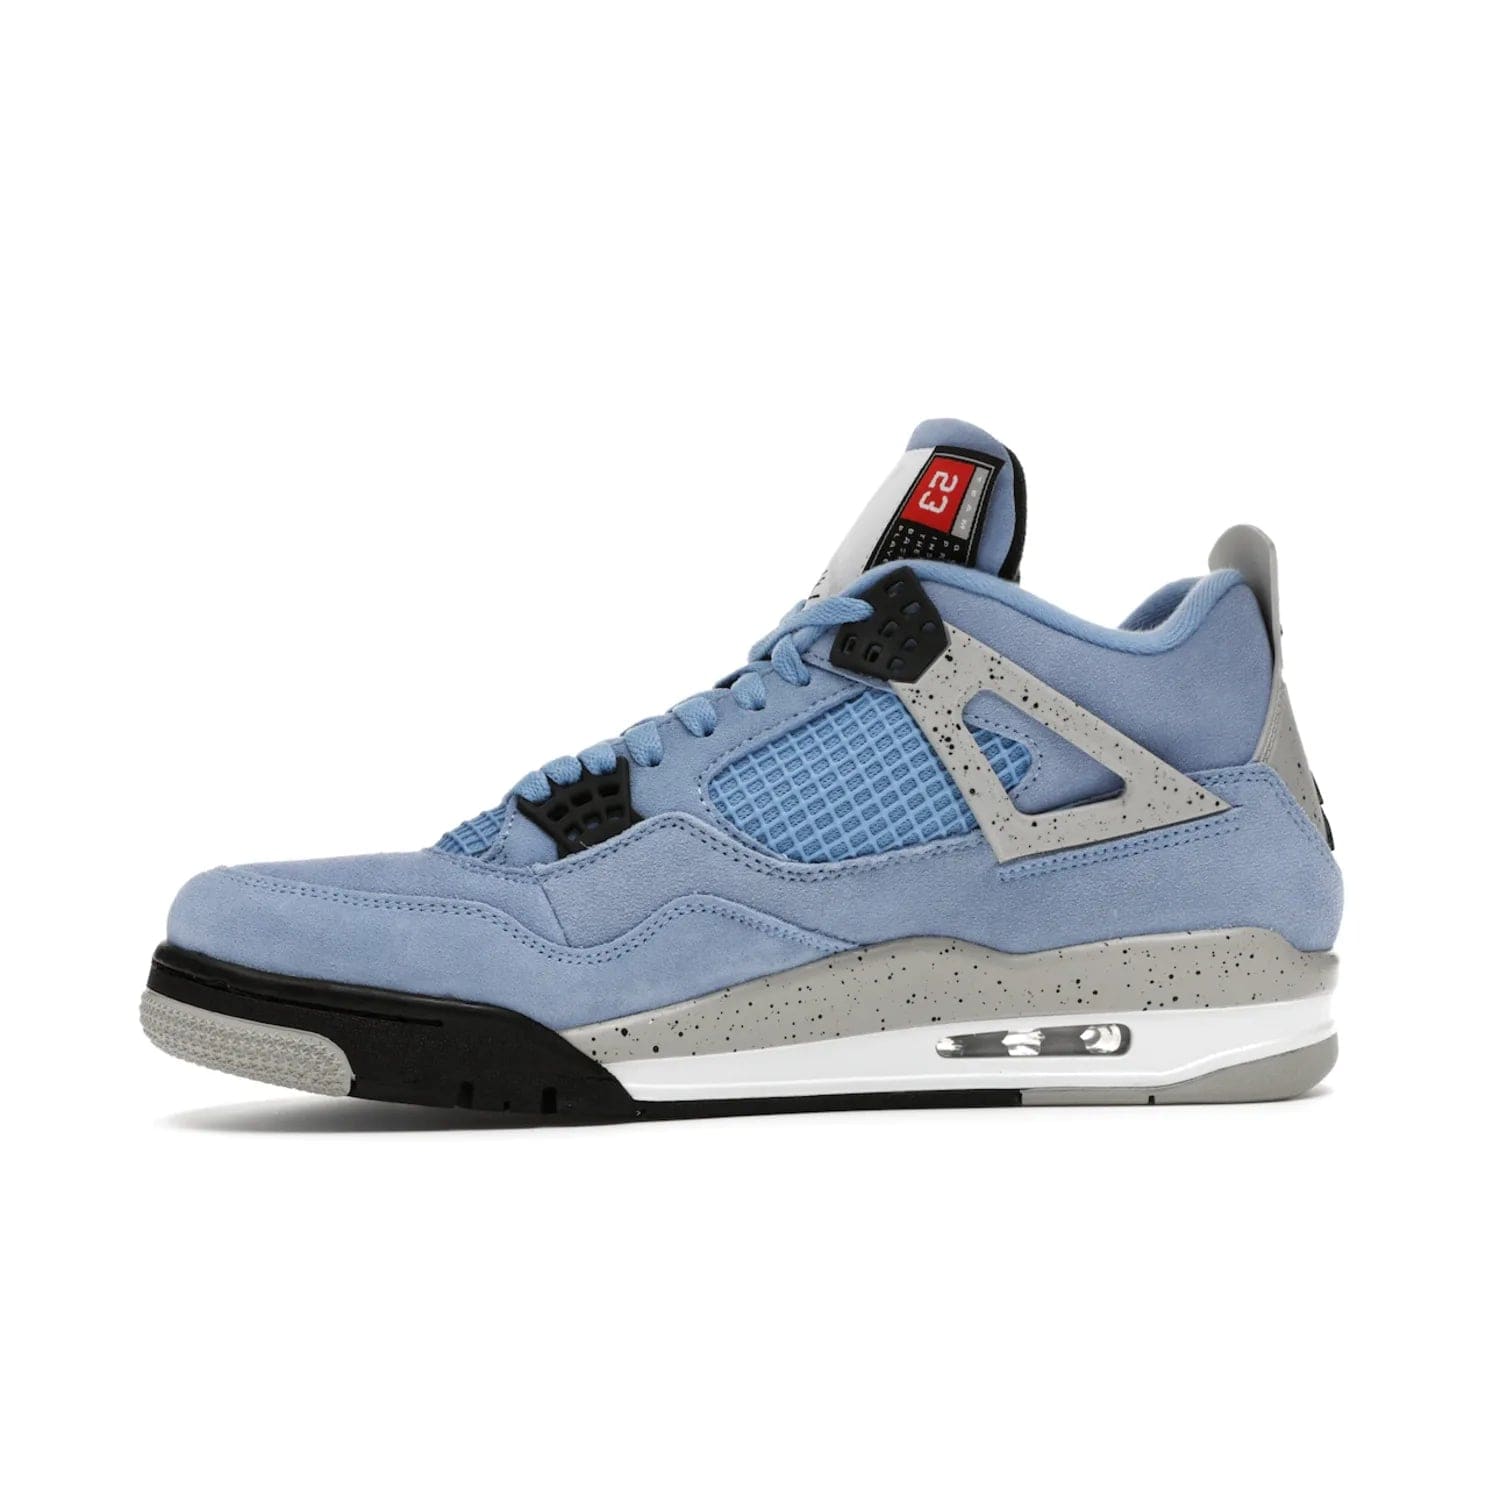 Jordan 4 Retro University Blue - Image 18 - Only at www.BallersClubKickz.com - The Air Jordan 4 University Blue honors MJ's alma mater. Rich University Blue suede, panels of netting, and Cement Grey speckled eyelets give this design an edgy look. Features a black, white and Tech Grey sole with a clear Air unit and two woven labels on the tongue. Jumpman logo & Team Jordan jock tag included. Released April 2021.